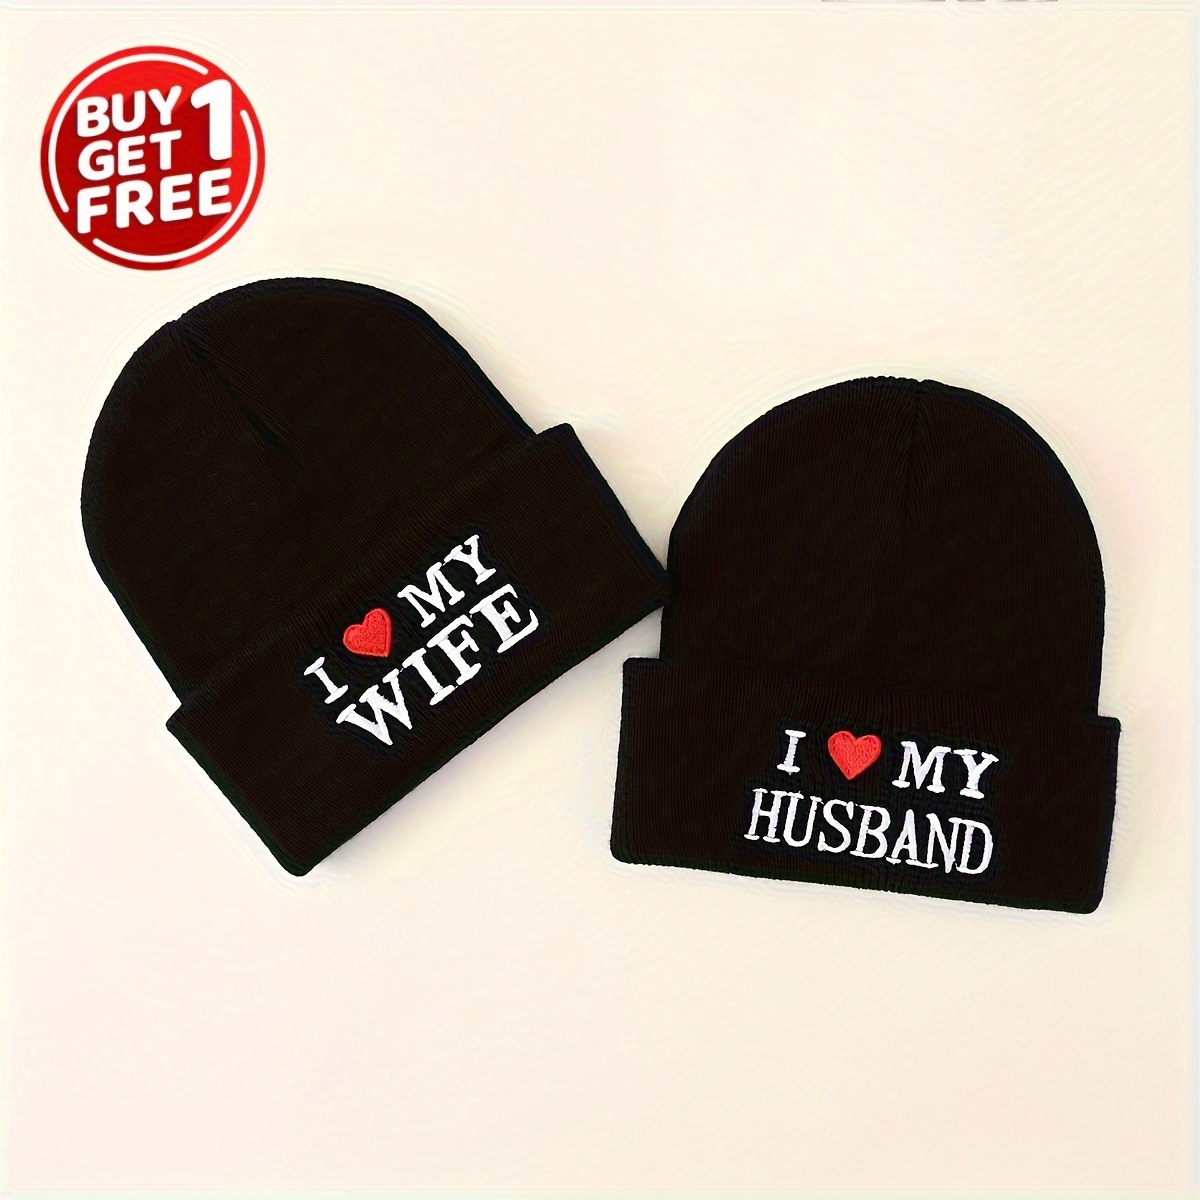 

2pcs/set Couple Beanie Wife Husband Embroidered Knit Hats Trendy Skull Cap Black Cuffed Beanies For Women Men Valentine's Day Gift